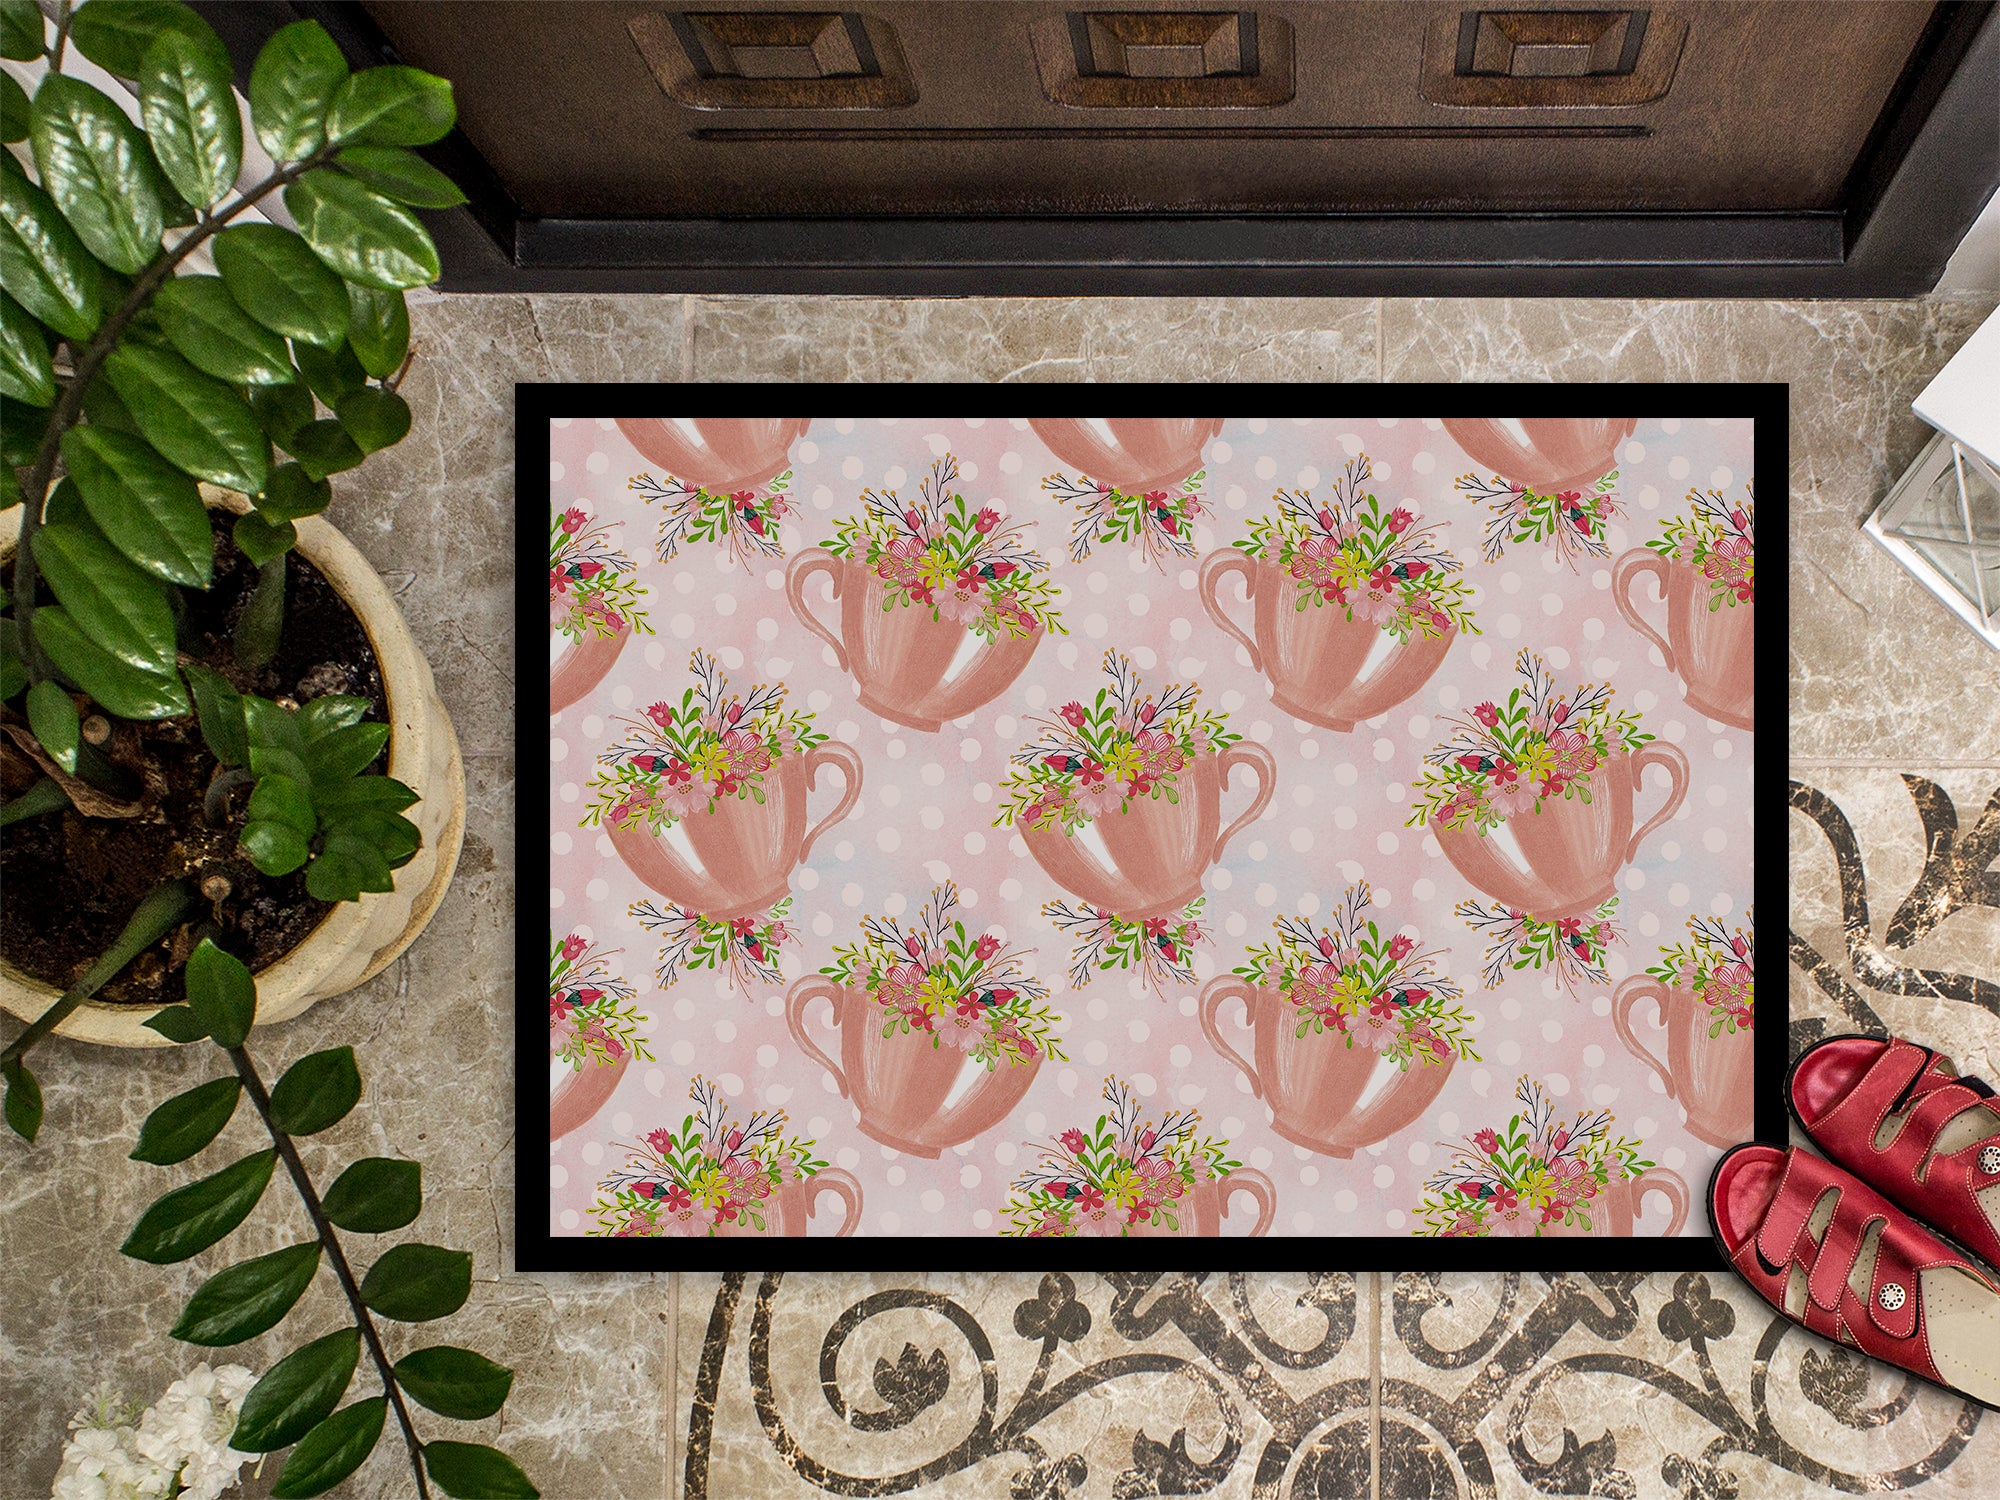 Tea Cup and Flowers Pink Indoor or Outdoor Mat 18x27 BB7481MAT - the-store.com